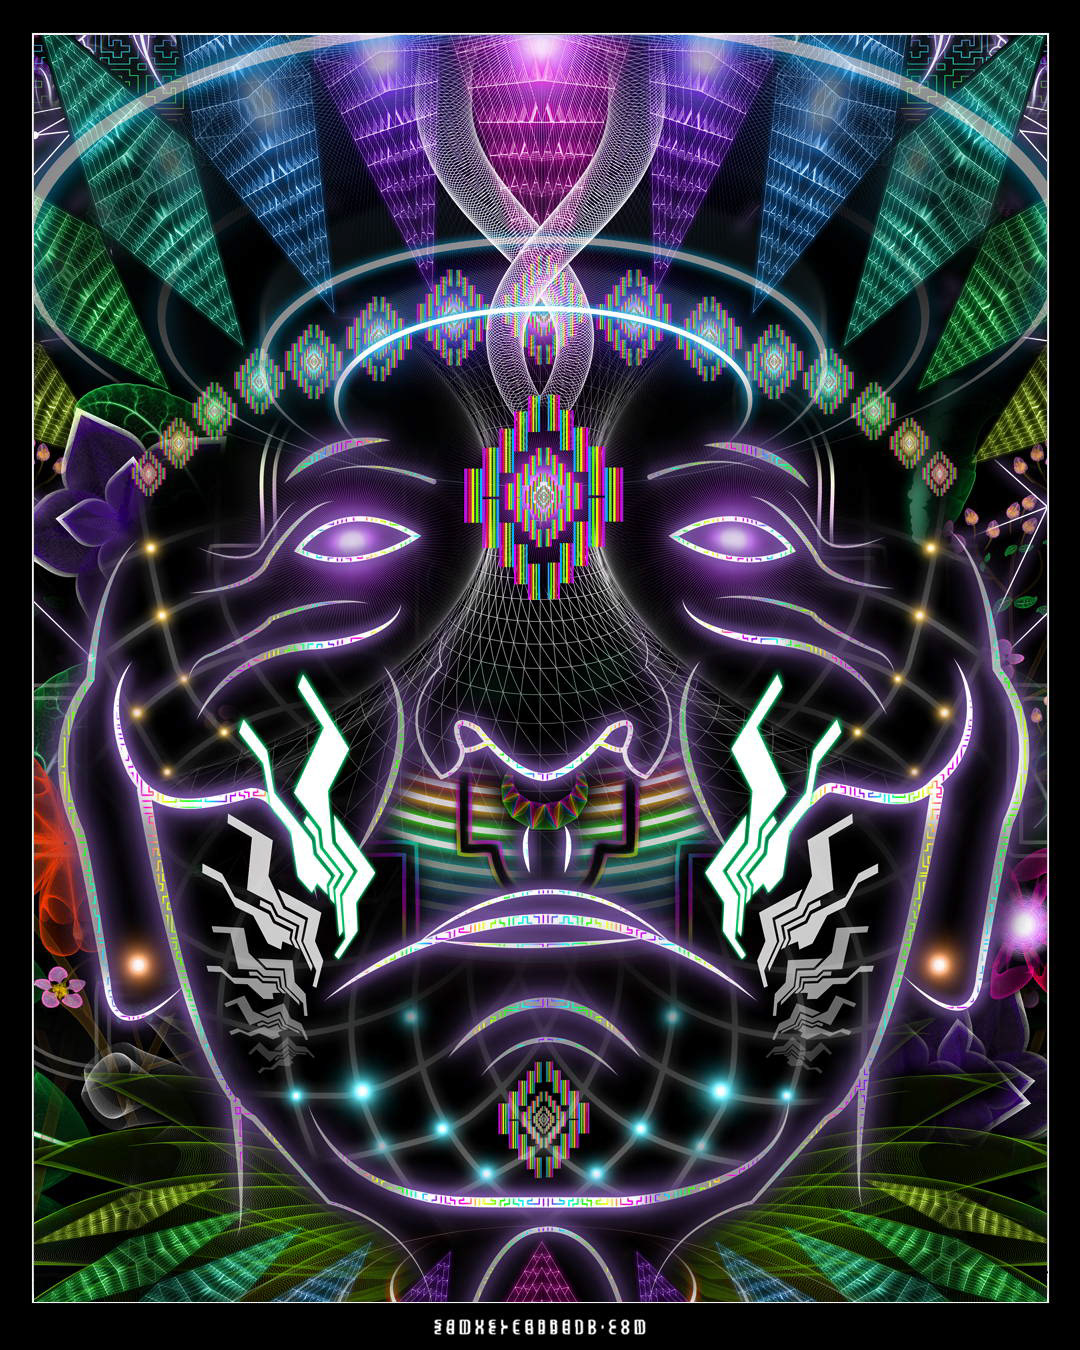 DMT psy art visionary art hyperspace abstract acid dark digital artist fantasy geometry lsd mystical psychedelic rainbow spiritual surreal symmetry trippy consciousness sacred fractal shamanism colorful Psychonaut